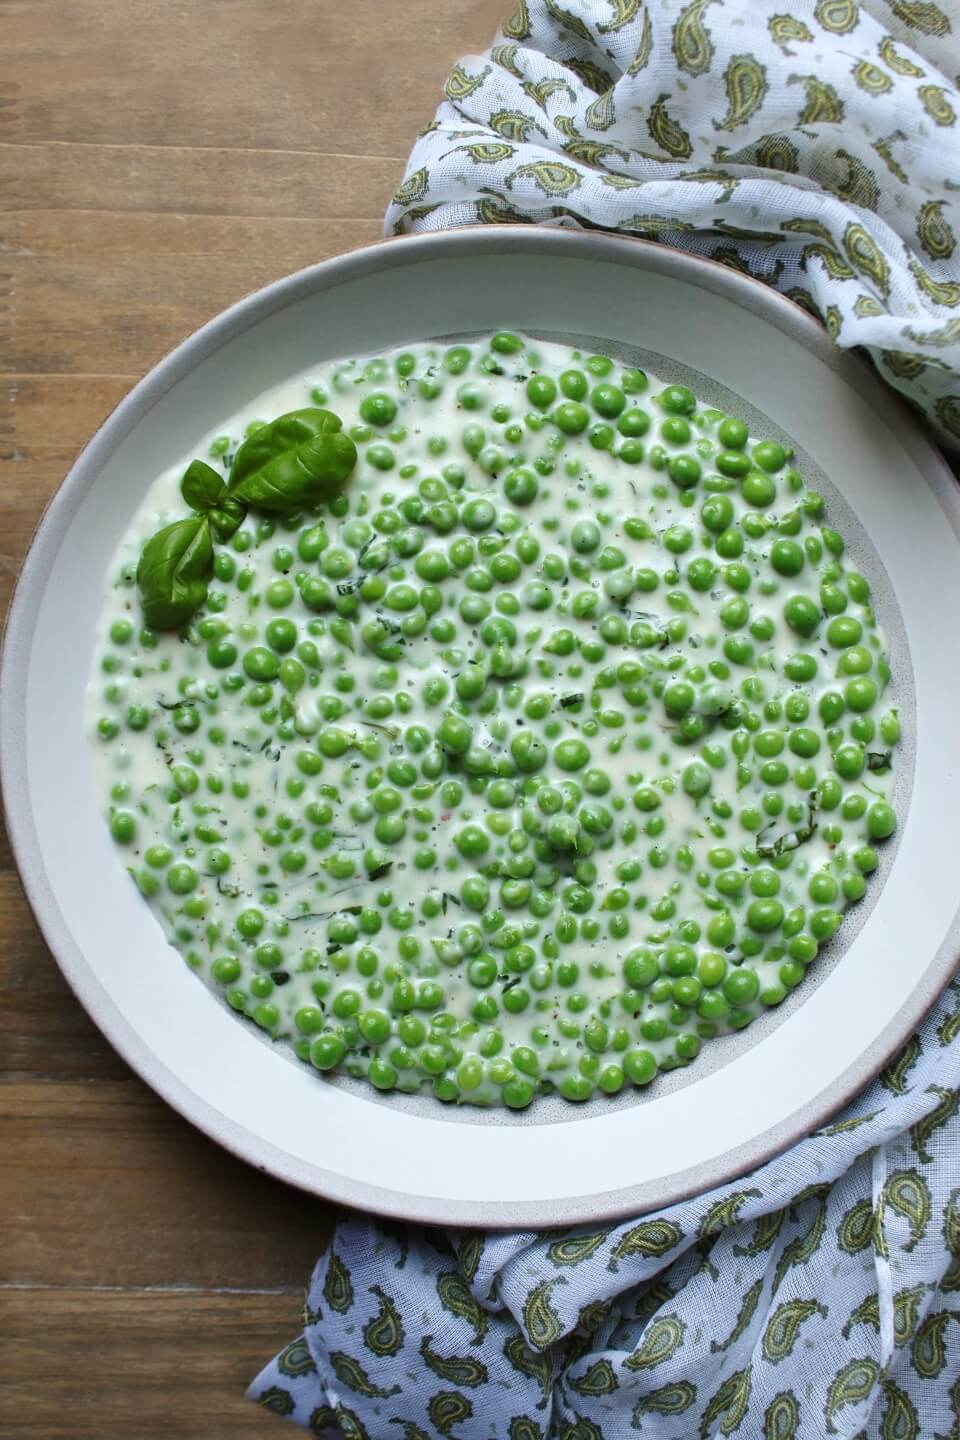 A bowl of green peas in a creamy sauce sits on a wooden table surrounded by a napkin with a green paisley print.